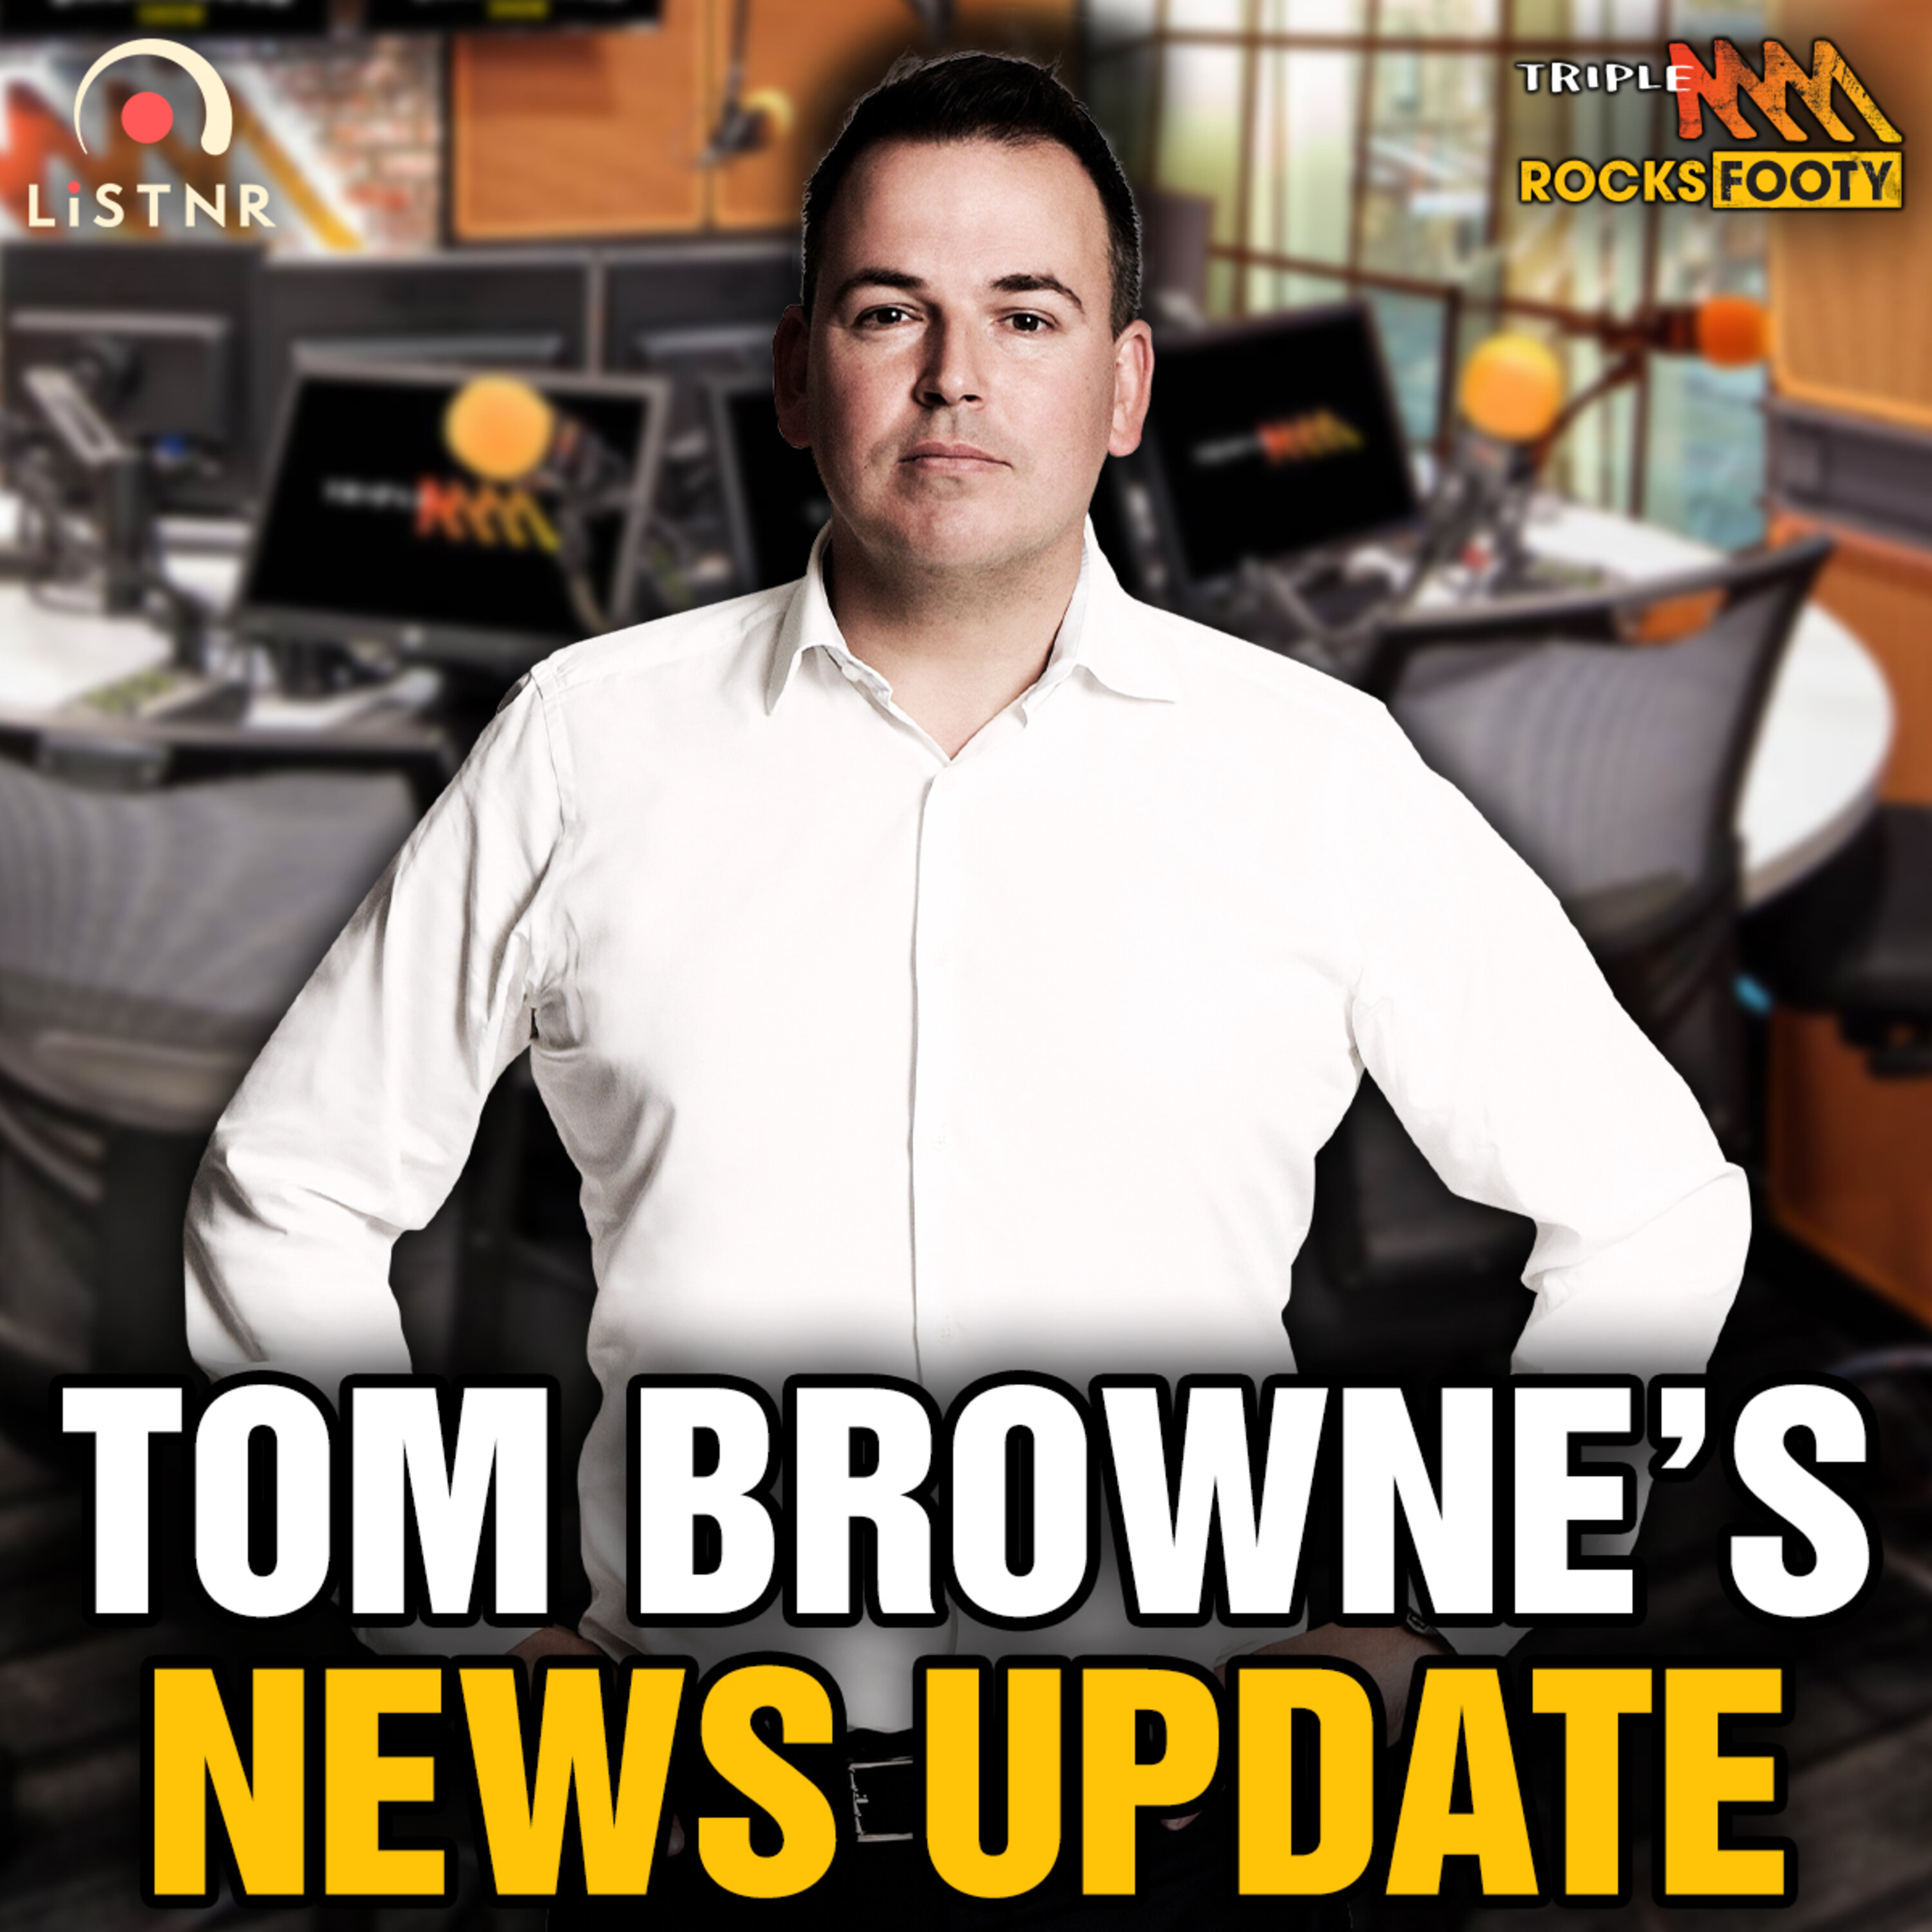 Tom Browne's News | Why the AFL is angry at Hawthorn, Brendon Gale's suggested AFL role, Human Rights Commission claim coming as soon as tomorrow